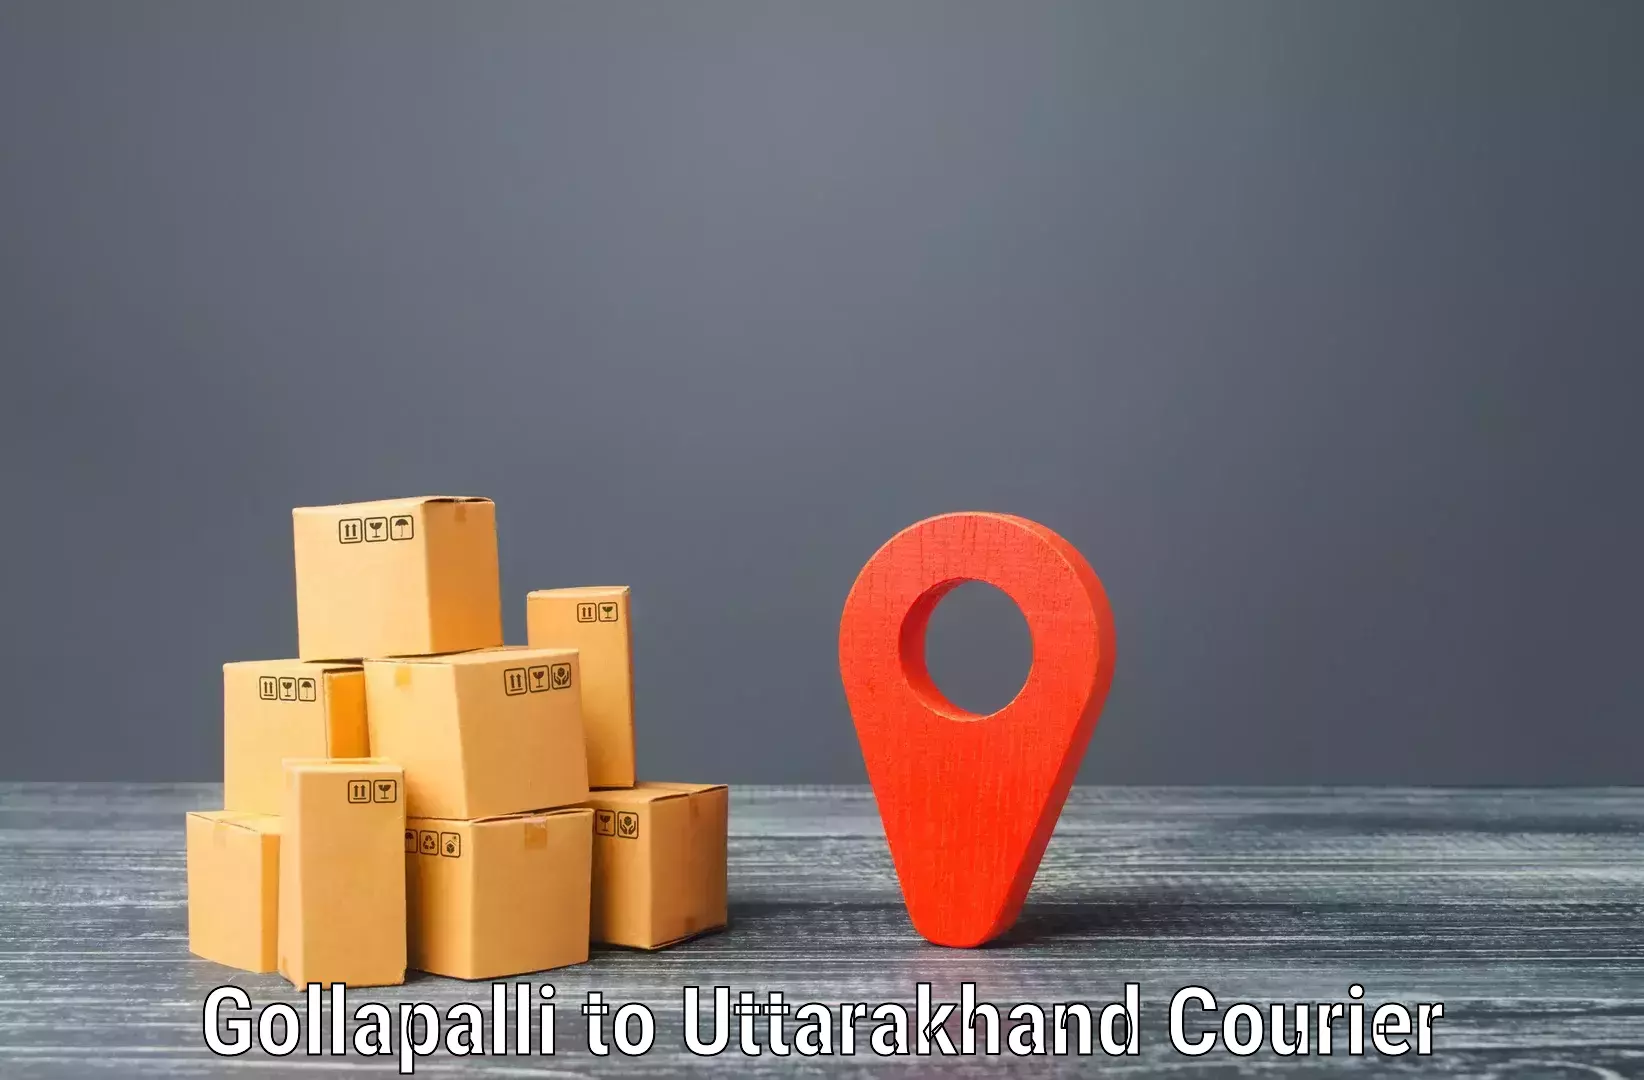 Rapid shipping services in Gollapalli to Uttarakhand